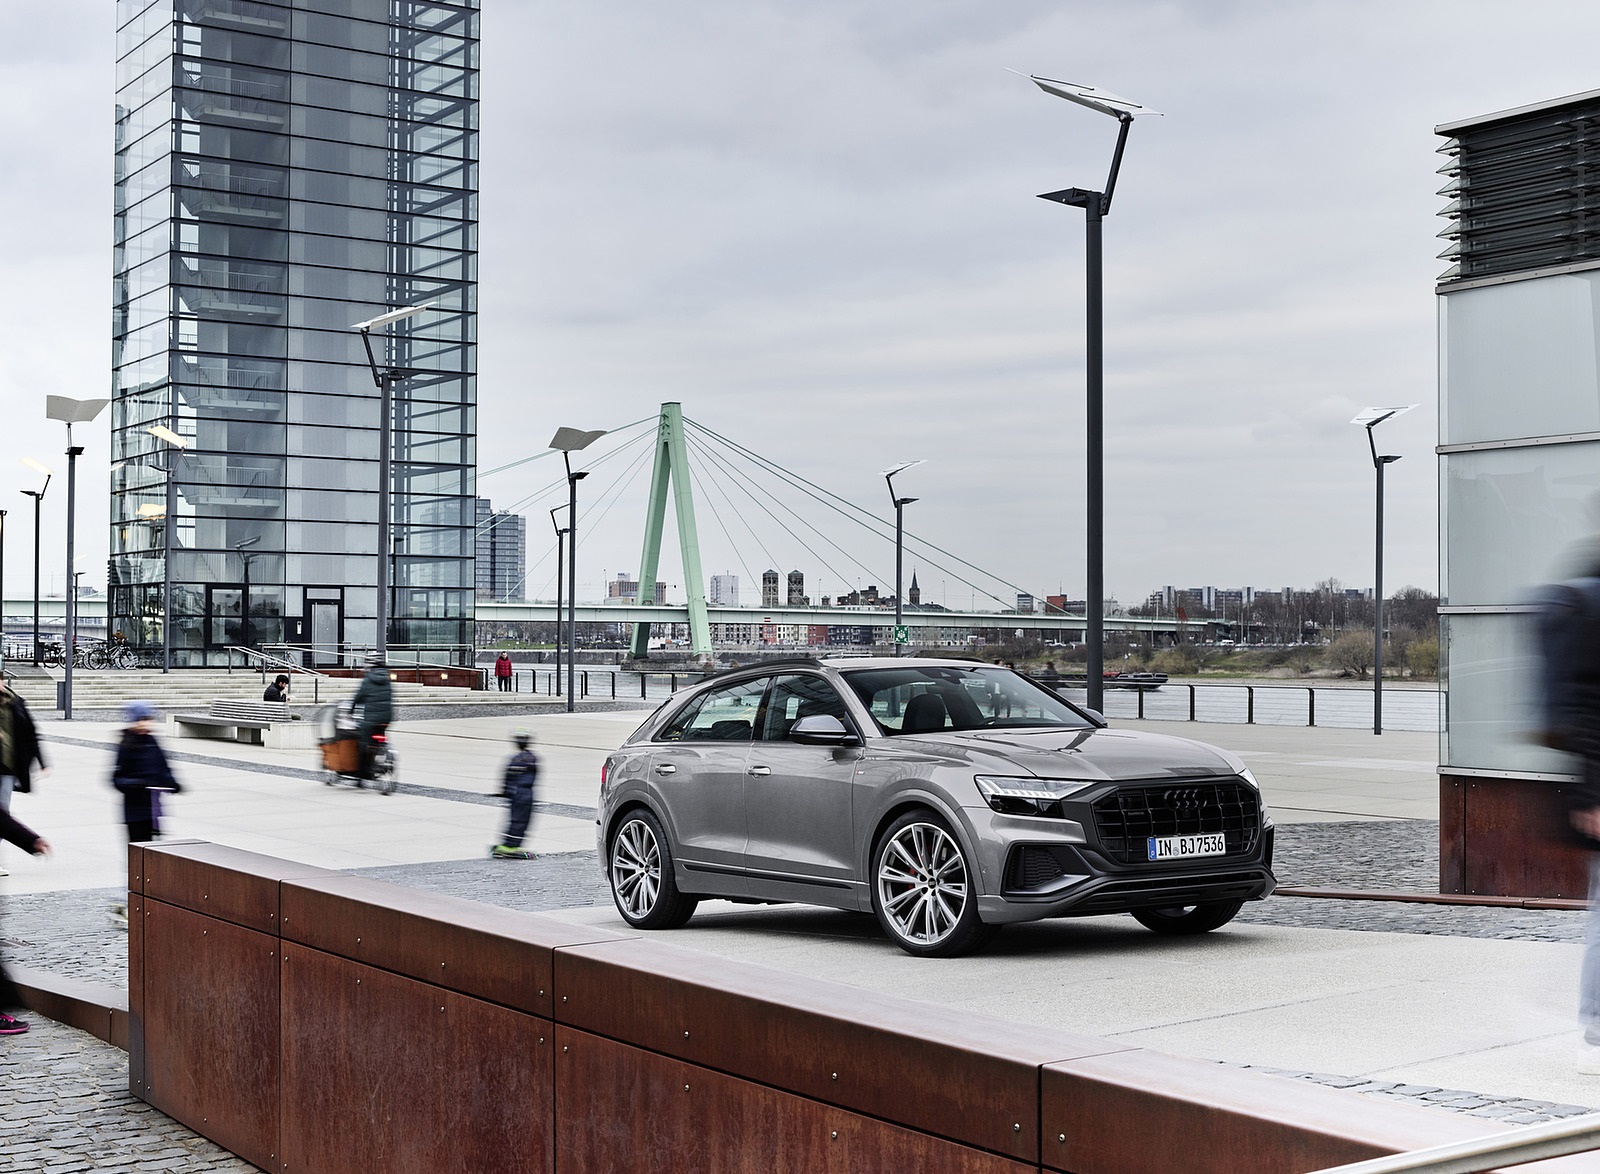 2022 Audi Q8 S Line Competition Plus (Color: Nardo Gray) Front Three-Quarter Wallpapers  #19 of 34